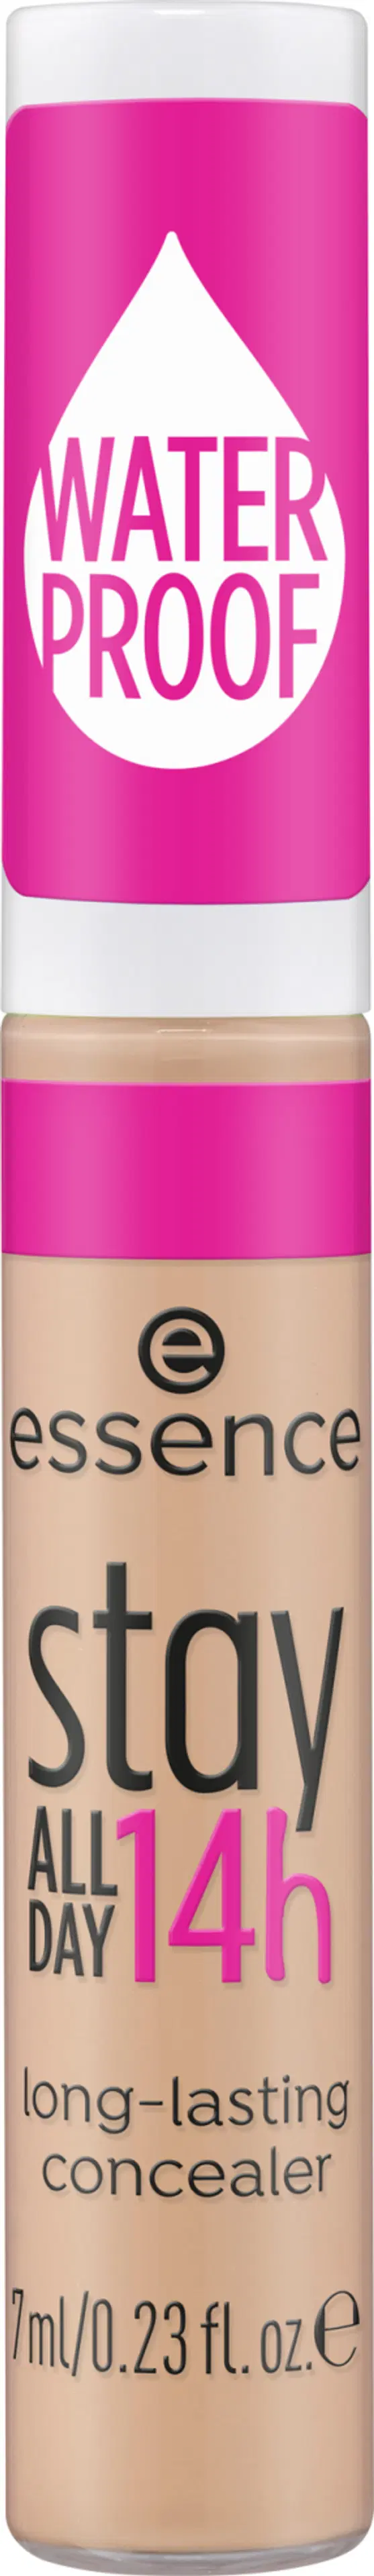 essence stay ALL DAY 14h long-lasting concealer peitevoide 7 ml